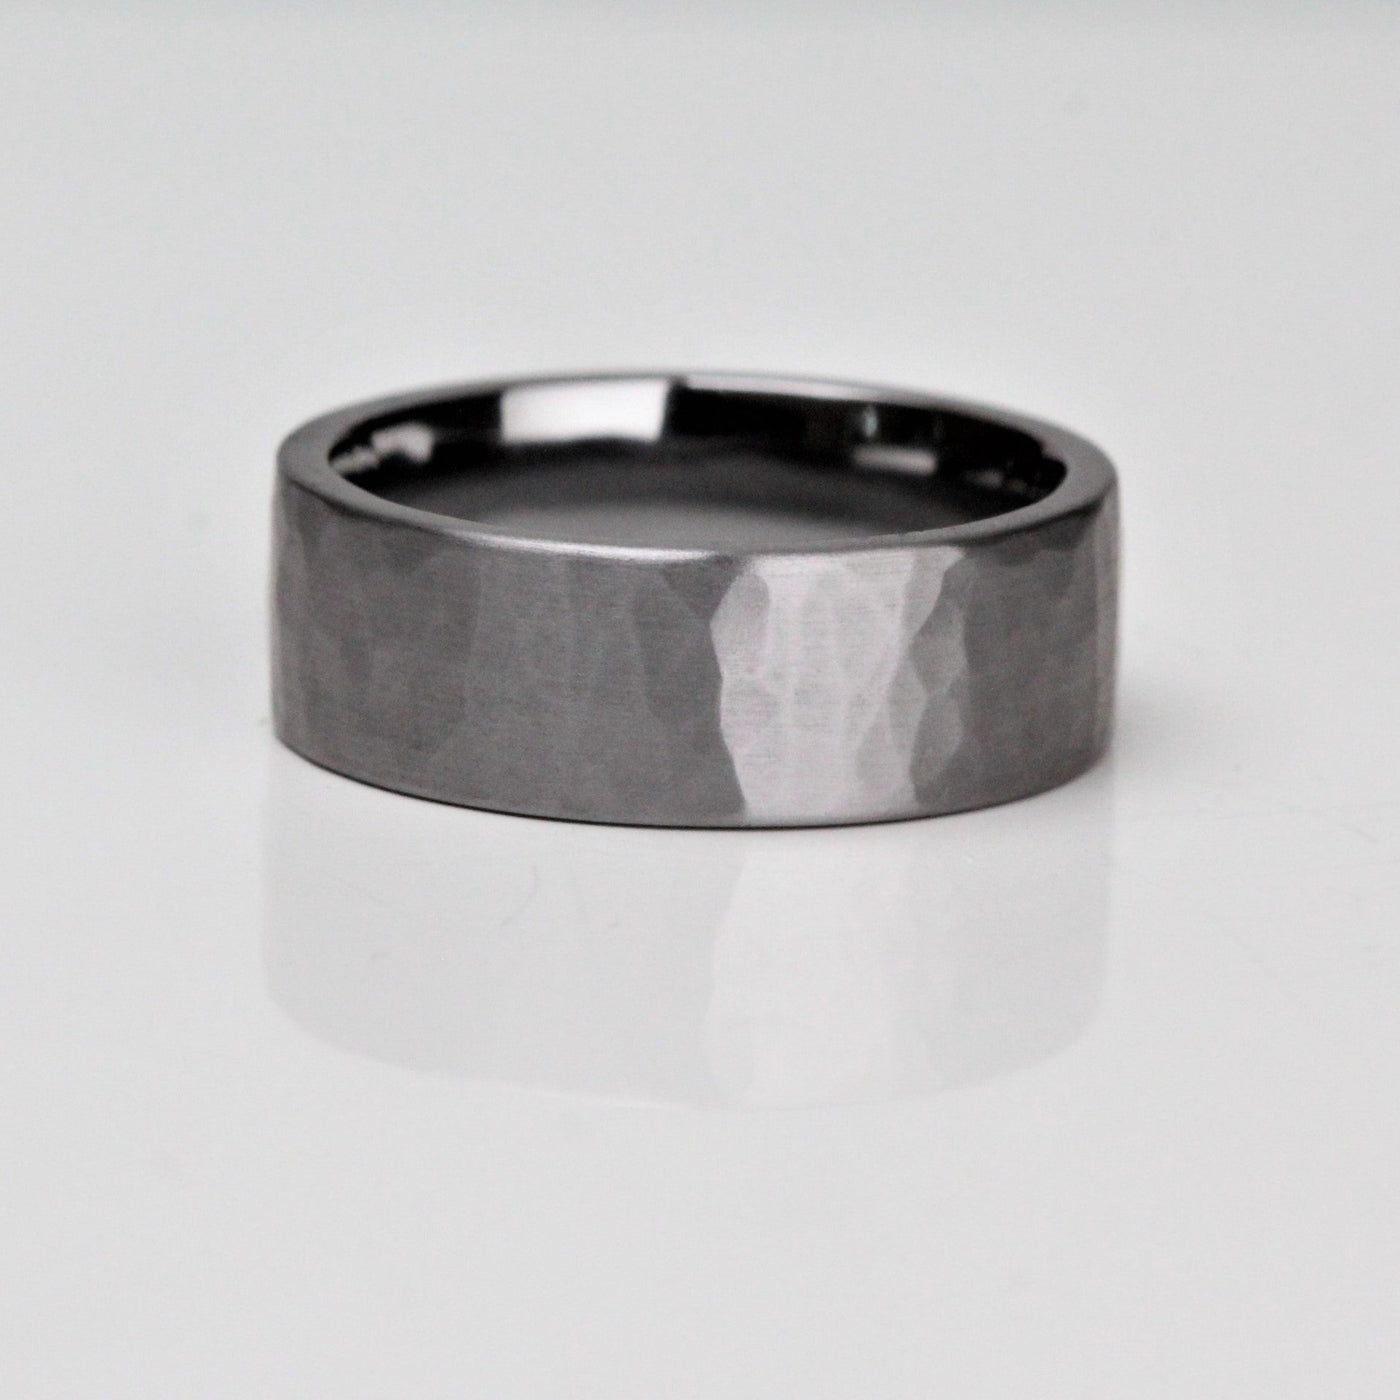 Dark metal wedding ring made of Tantalum. With a hammered and brushed finish. Flat outside with a comfort fit inside the ring